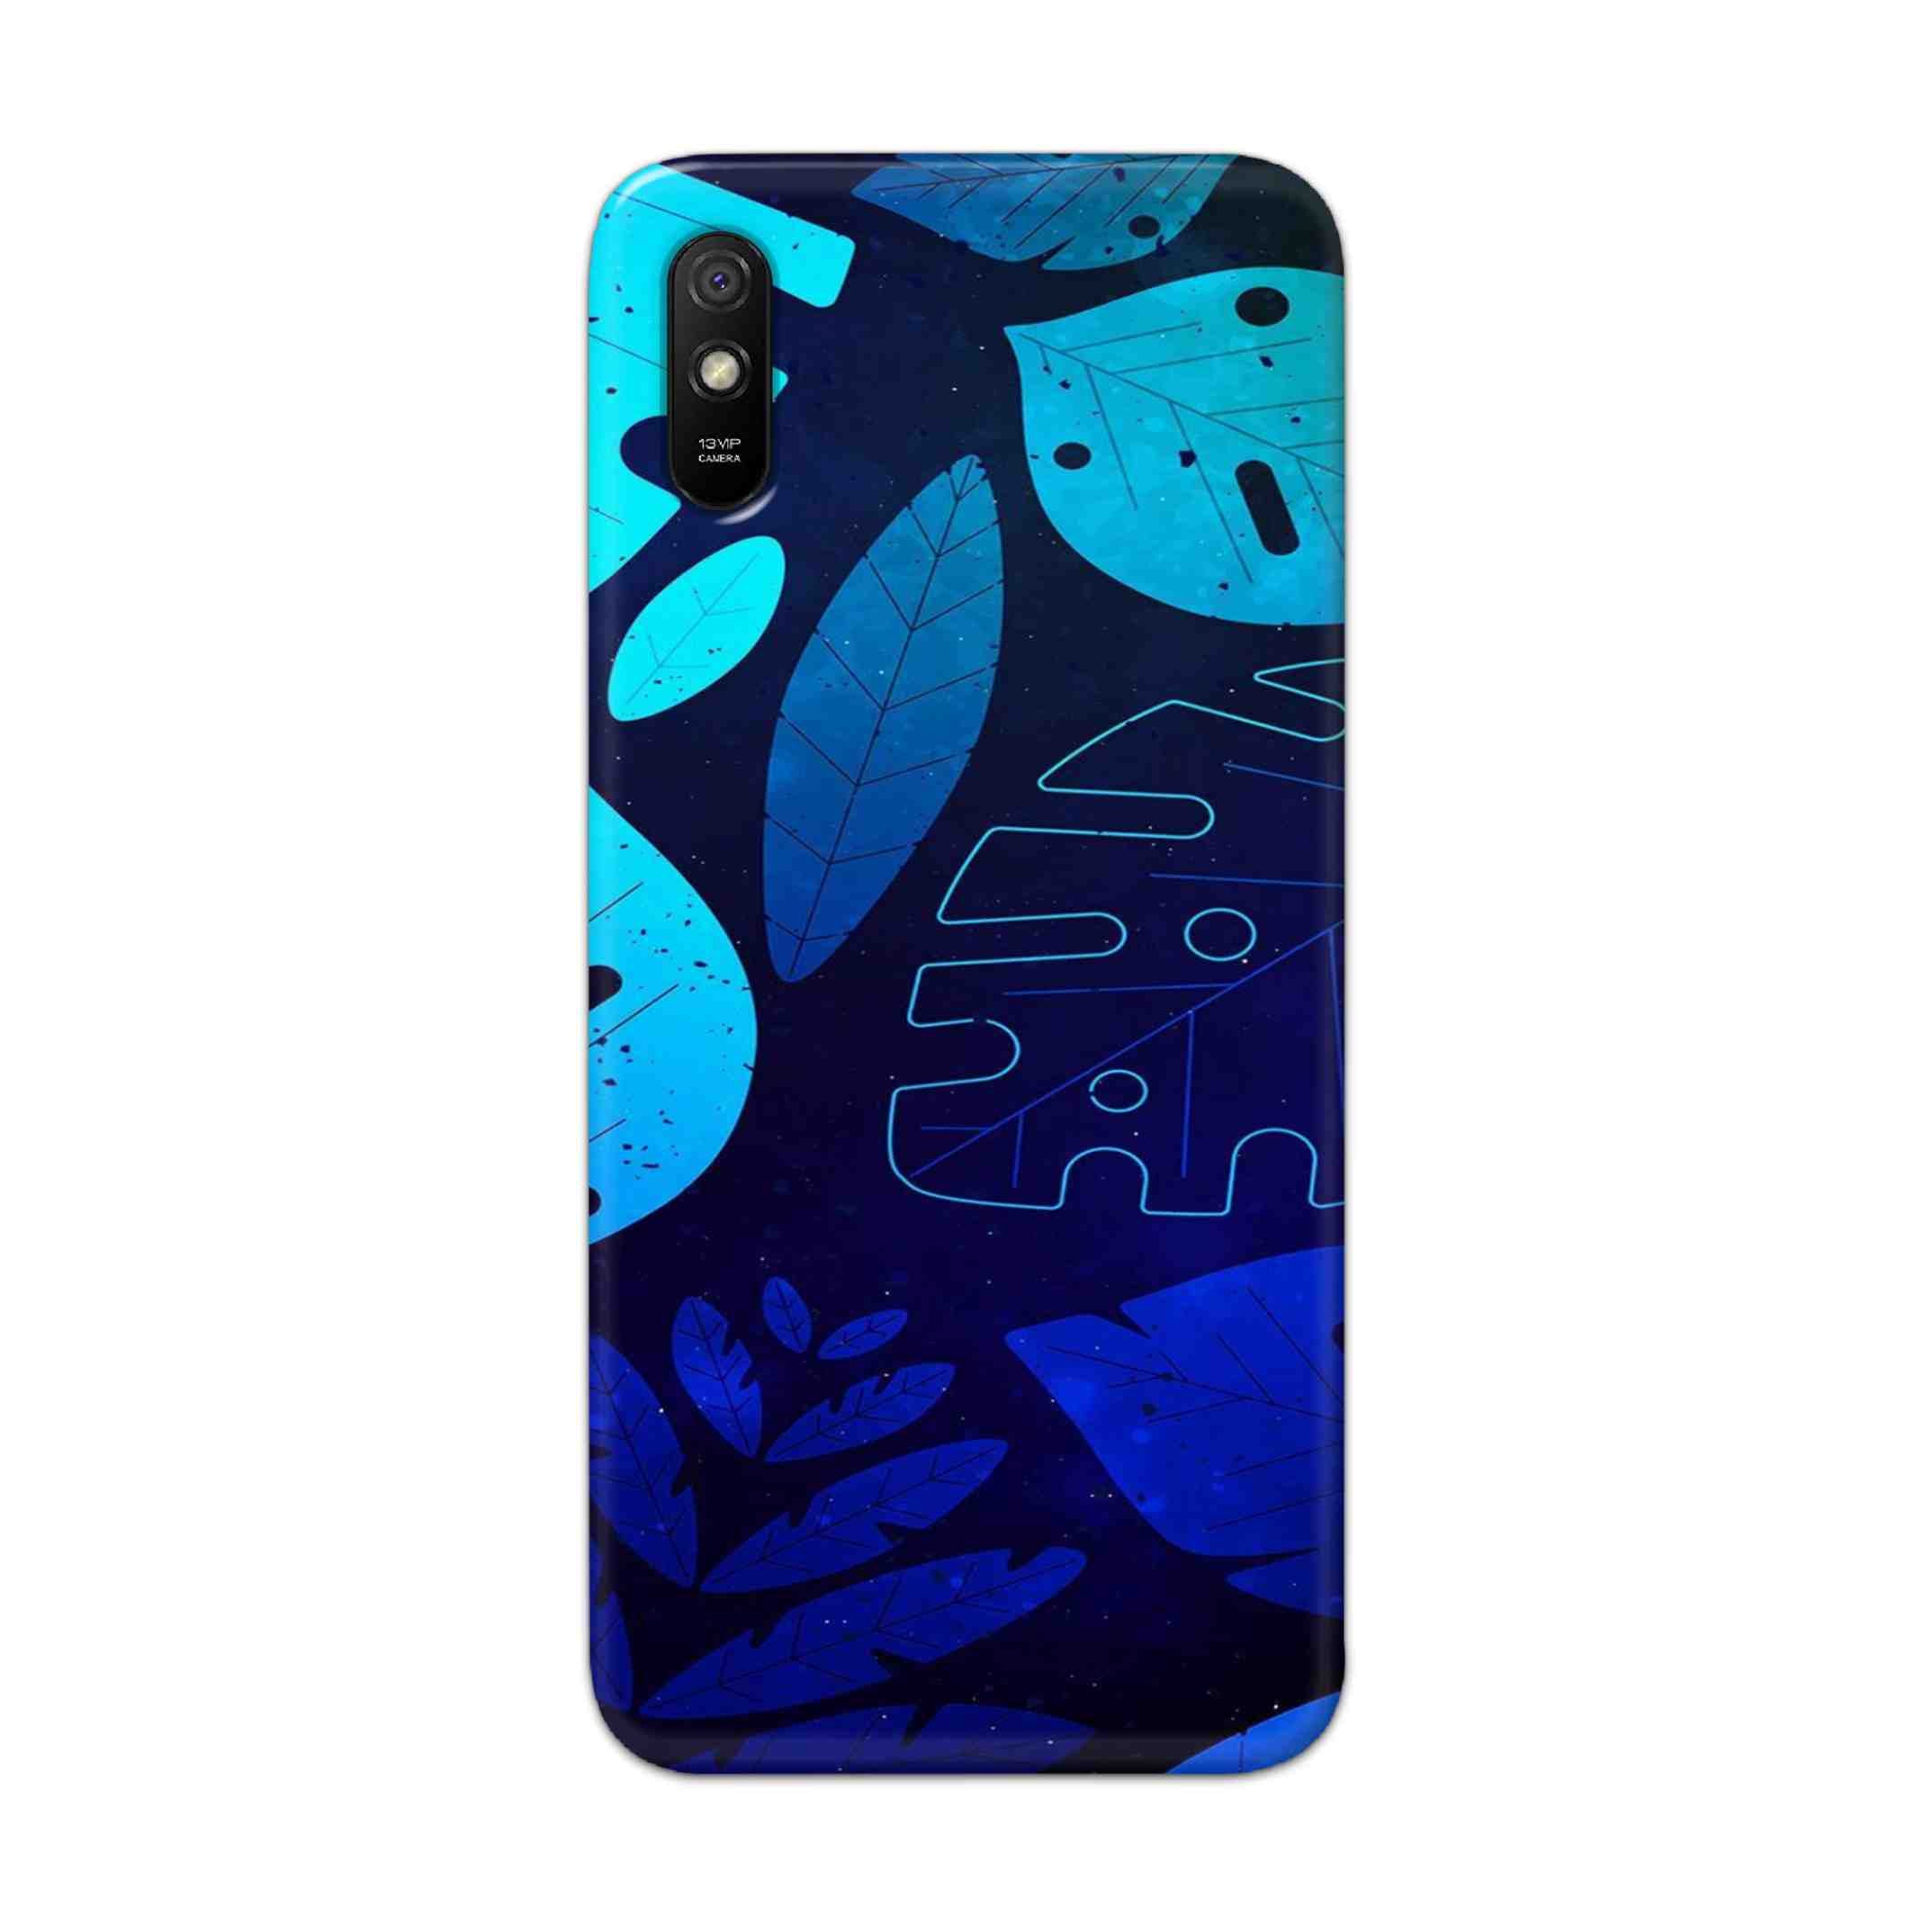 Buy Neon Leaf Hard Back Mobile Phone Case Cover For Redmi 9A Online